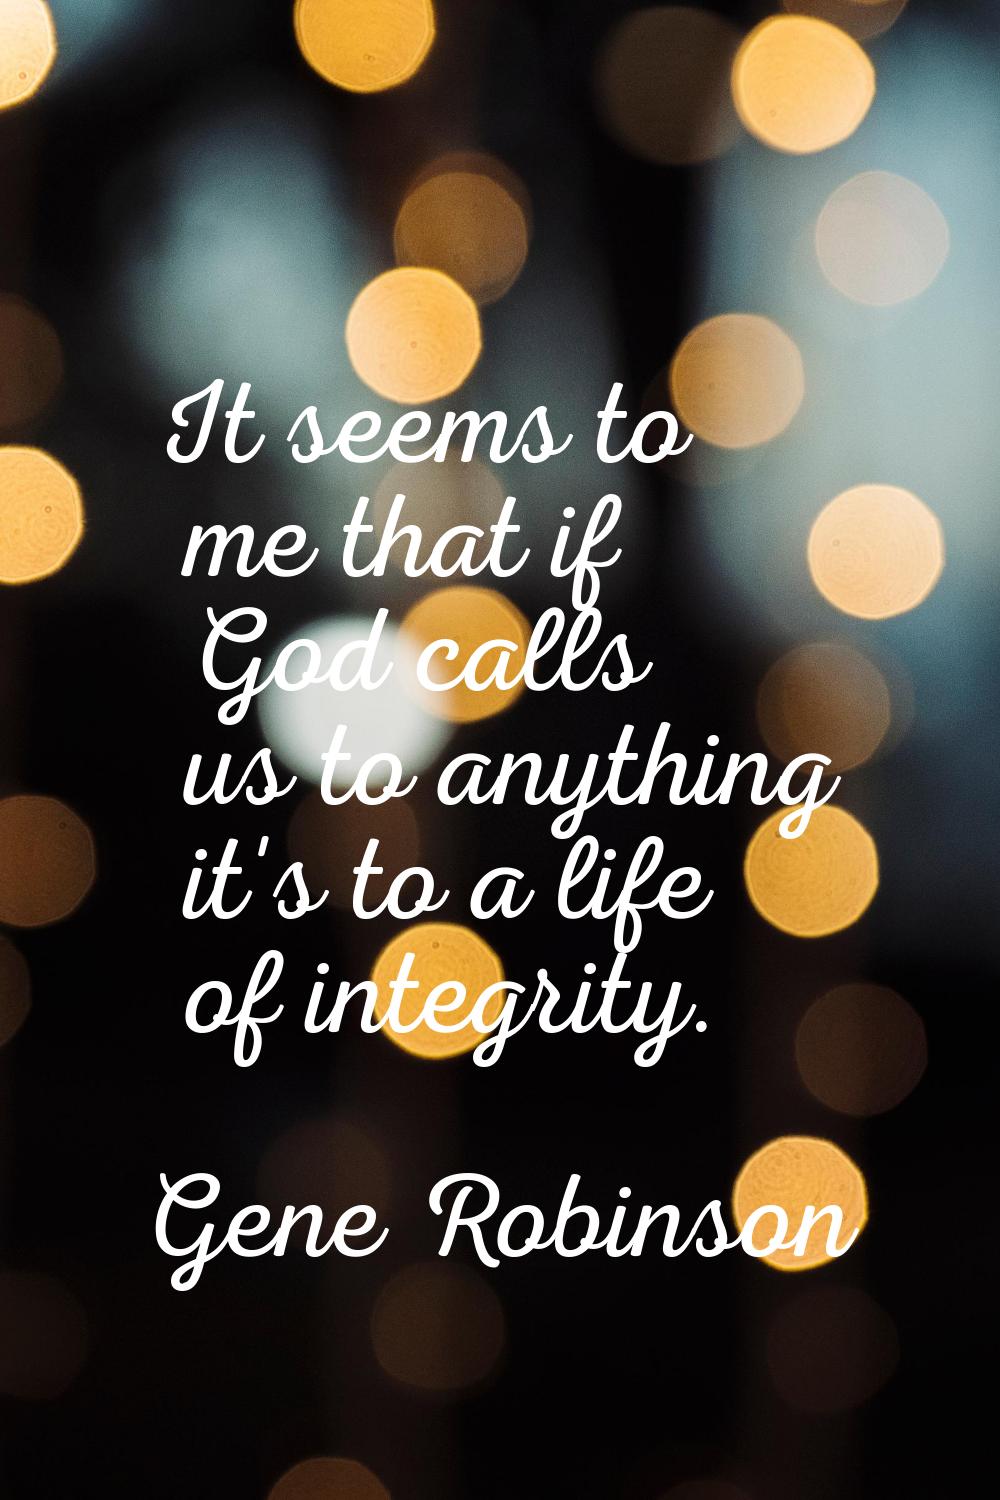 It seems to me that if God calls us to anything it's to a life of integrity.